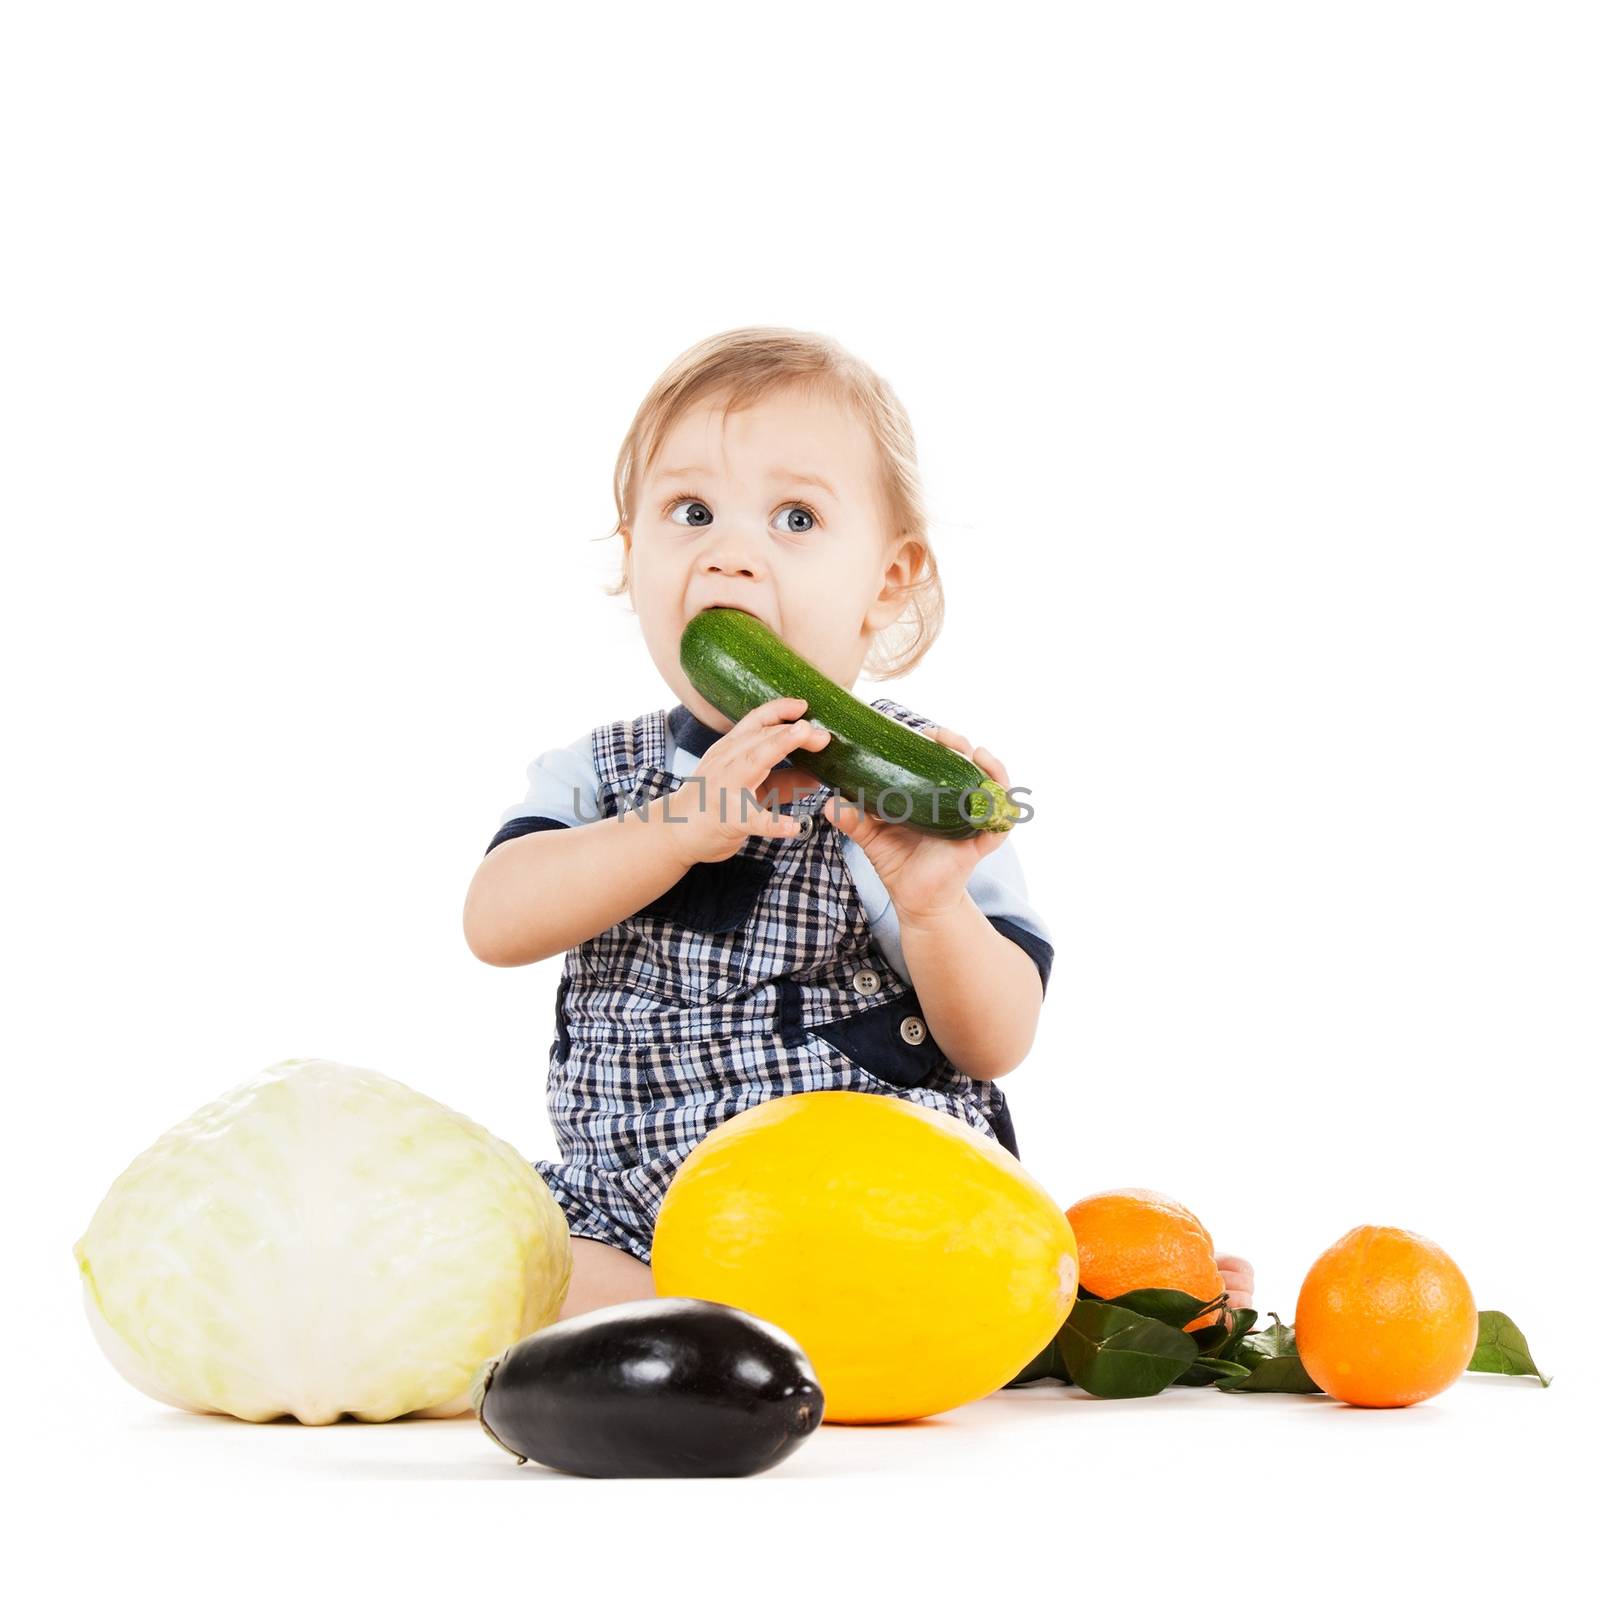 childhood and healthy food concept - cute toddler with vegetables and fruits eating squash